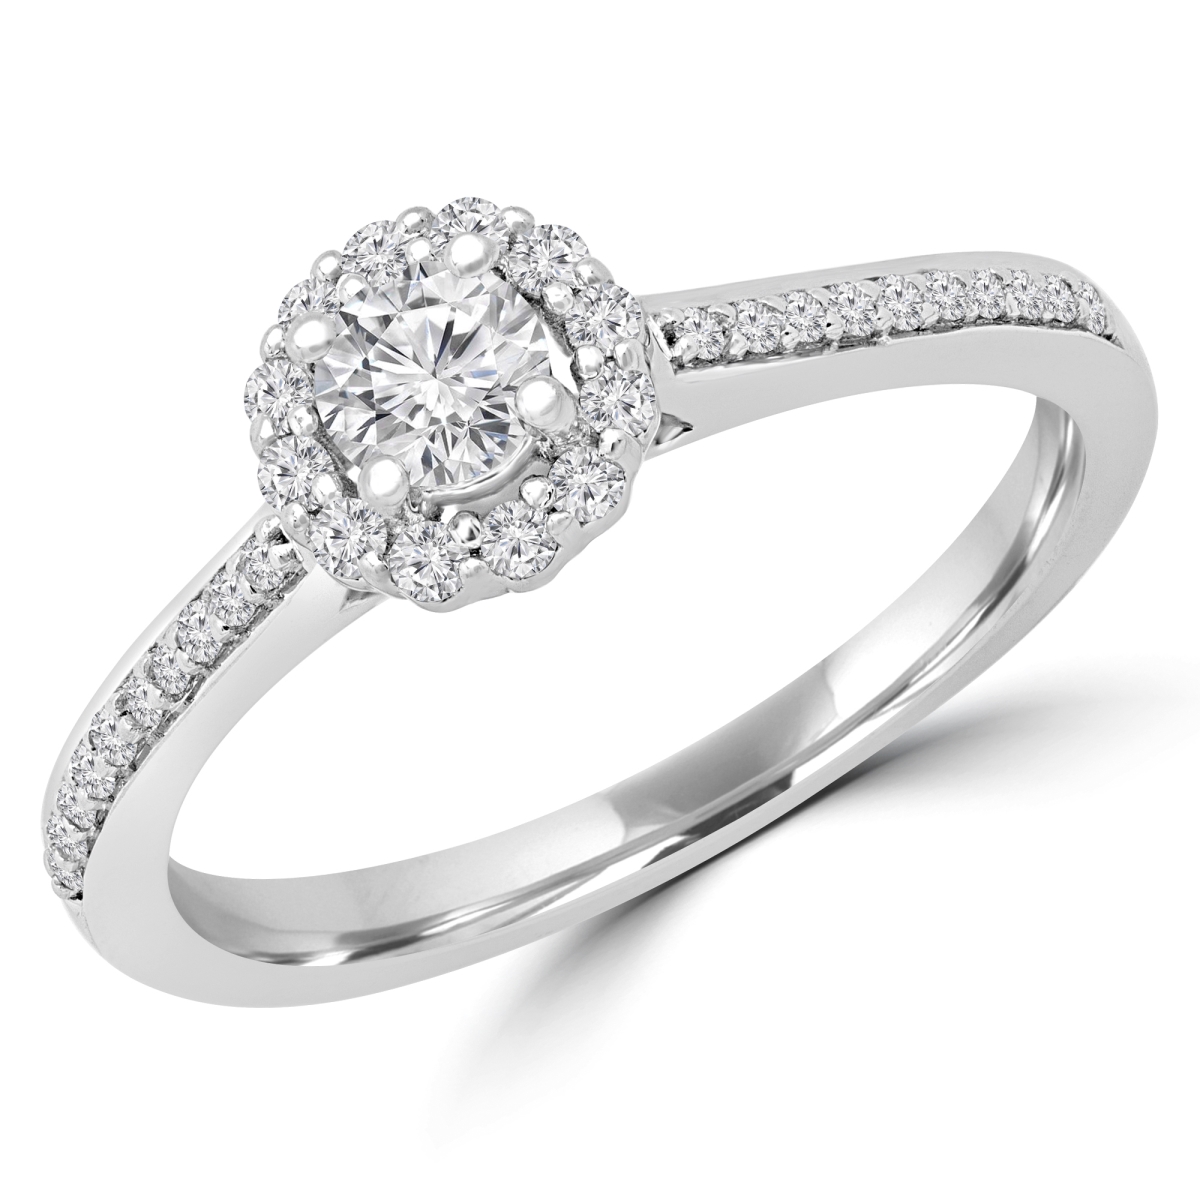 Picture of Majesty Diamonds MD190118-P 0.3 CTW Round Diamond Halo Engagement Ring in 14K White Gold